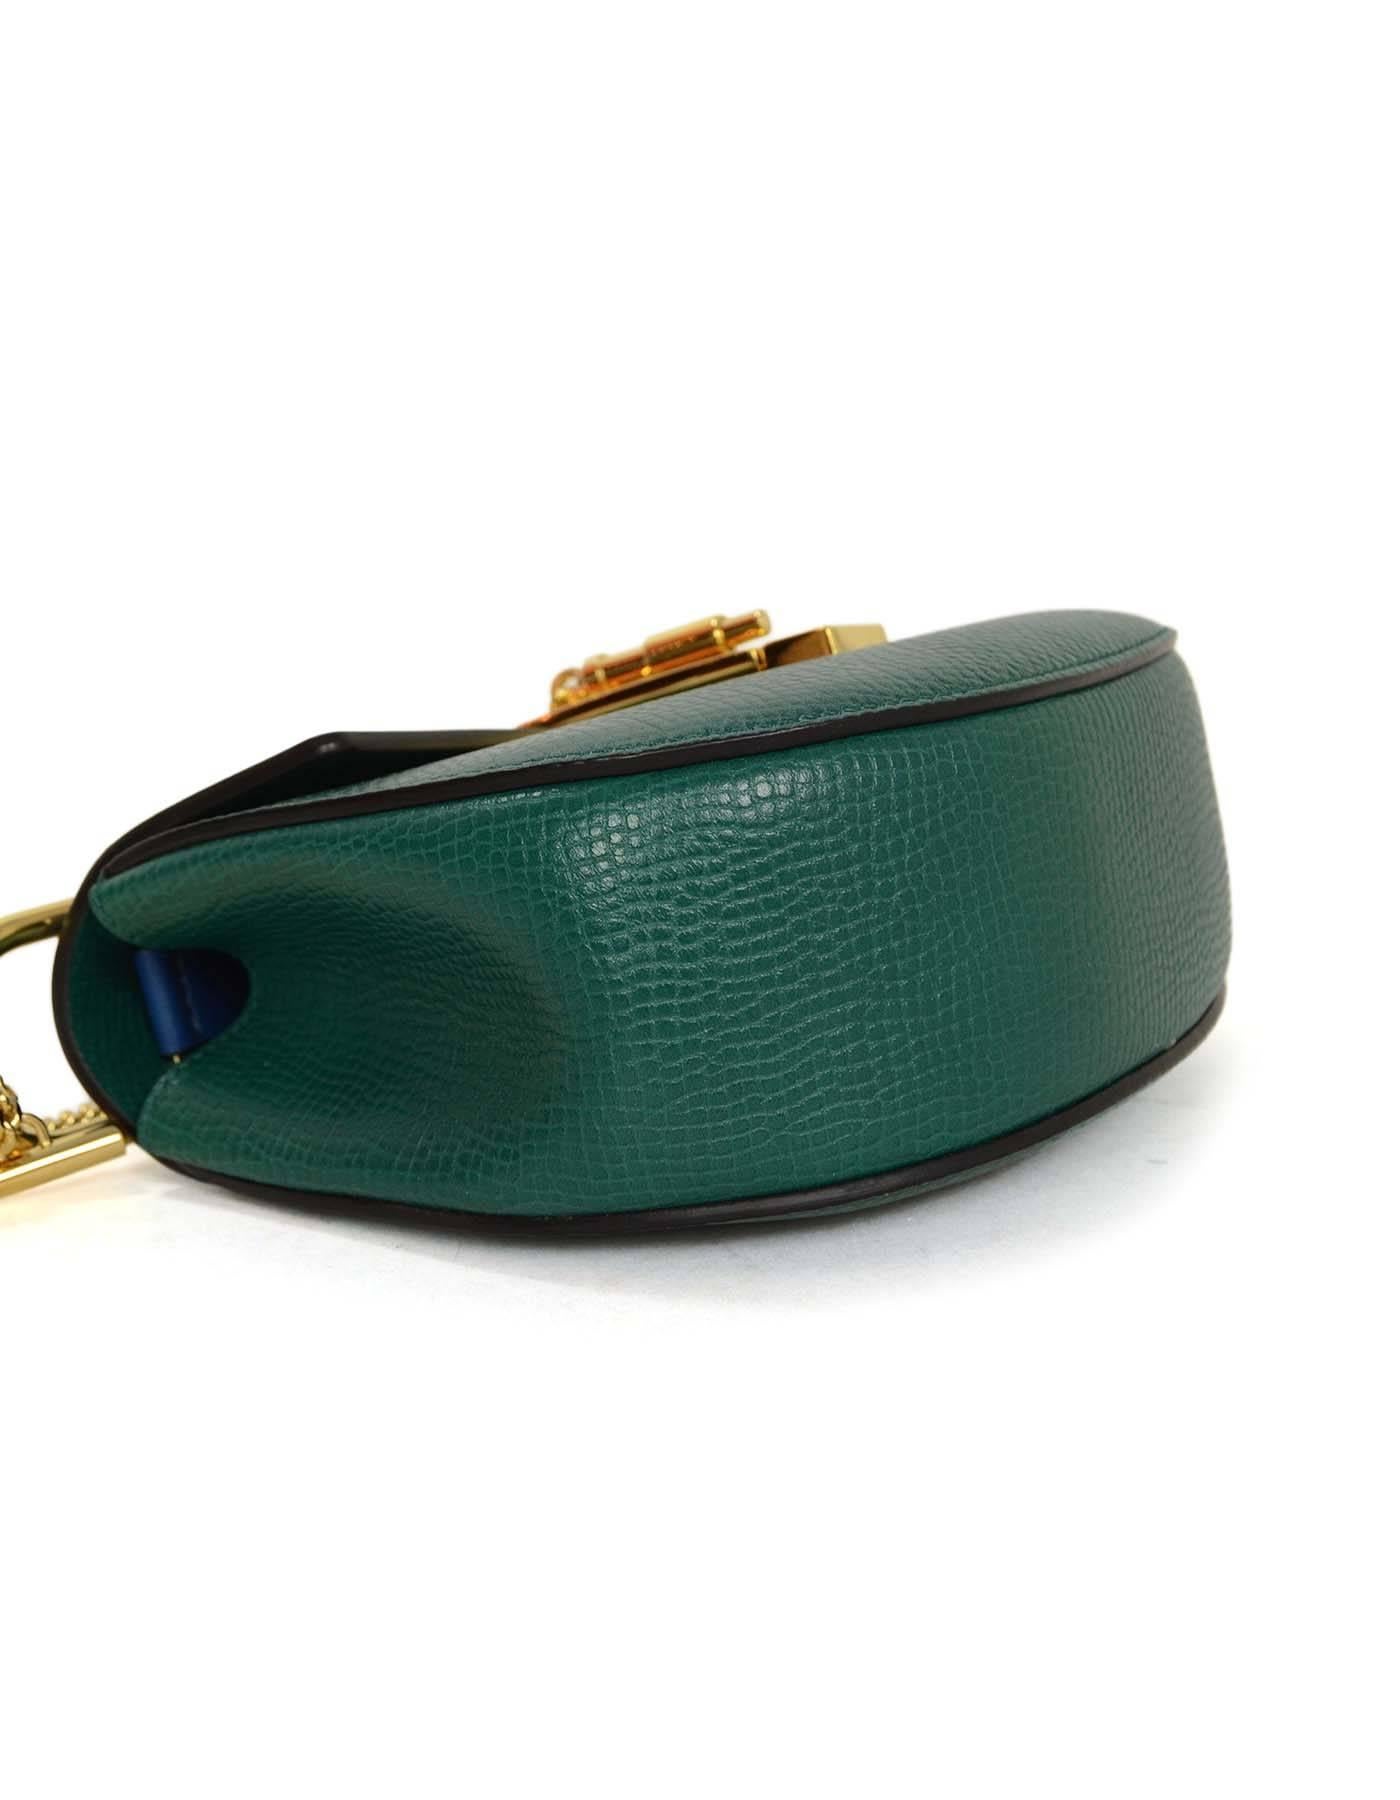 Chloe Blue and Green Bicolor Drew Small Crossbody Bag GHW rt. $1, 950 In Excellent Condition In New York, NY